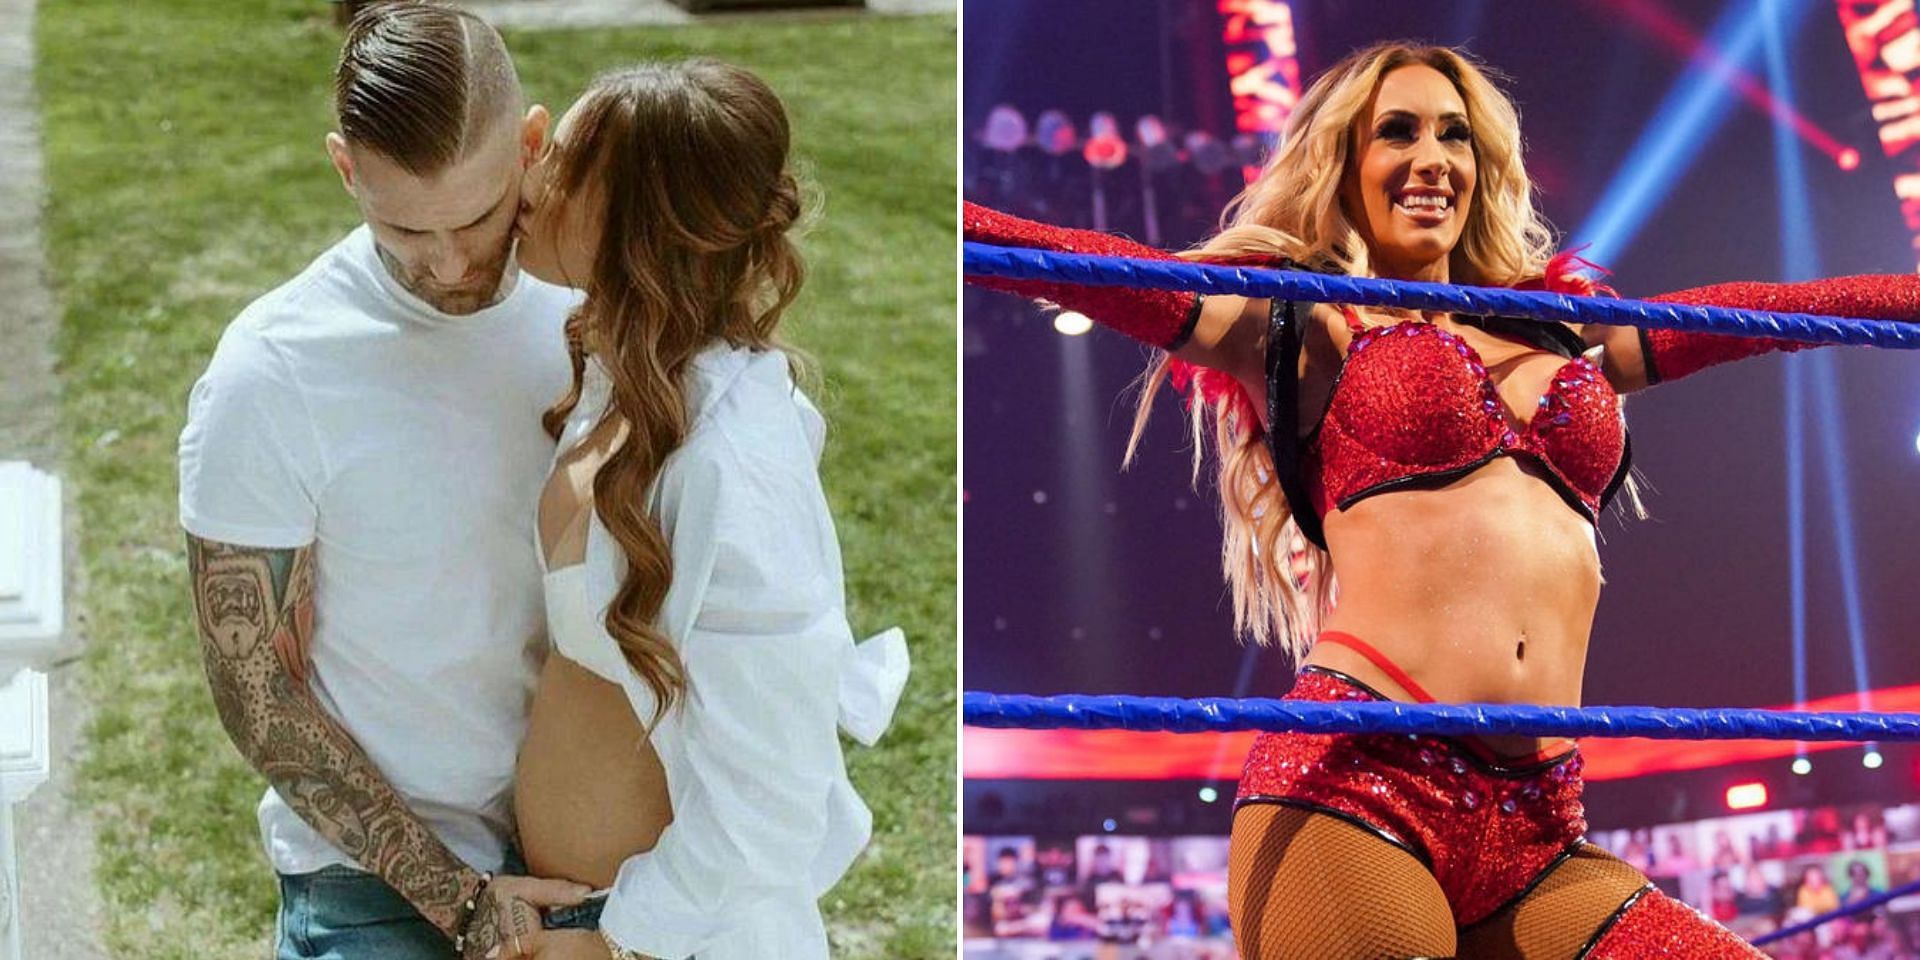 Does Carmella want her son to join WWE?